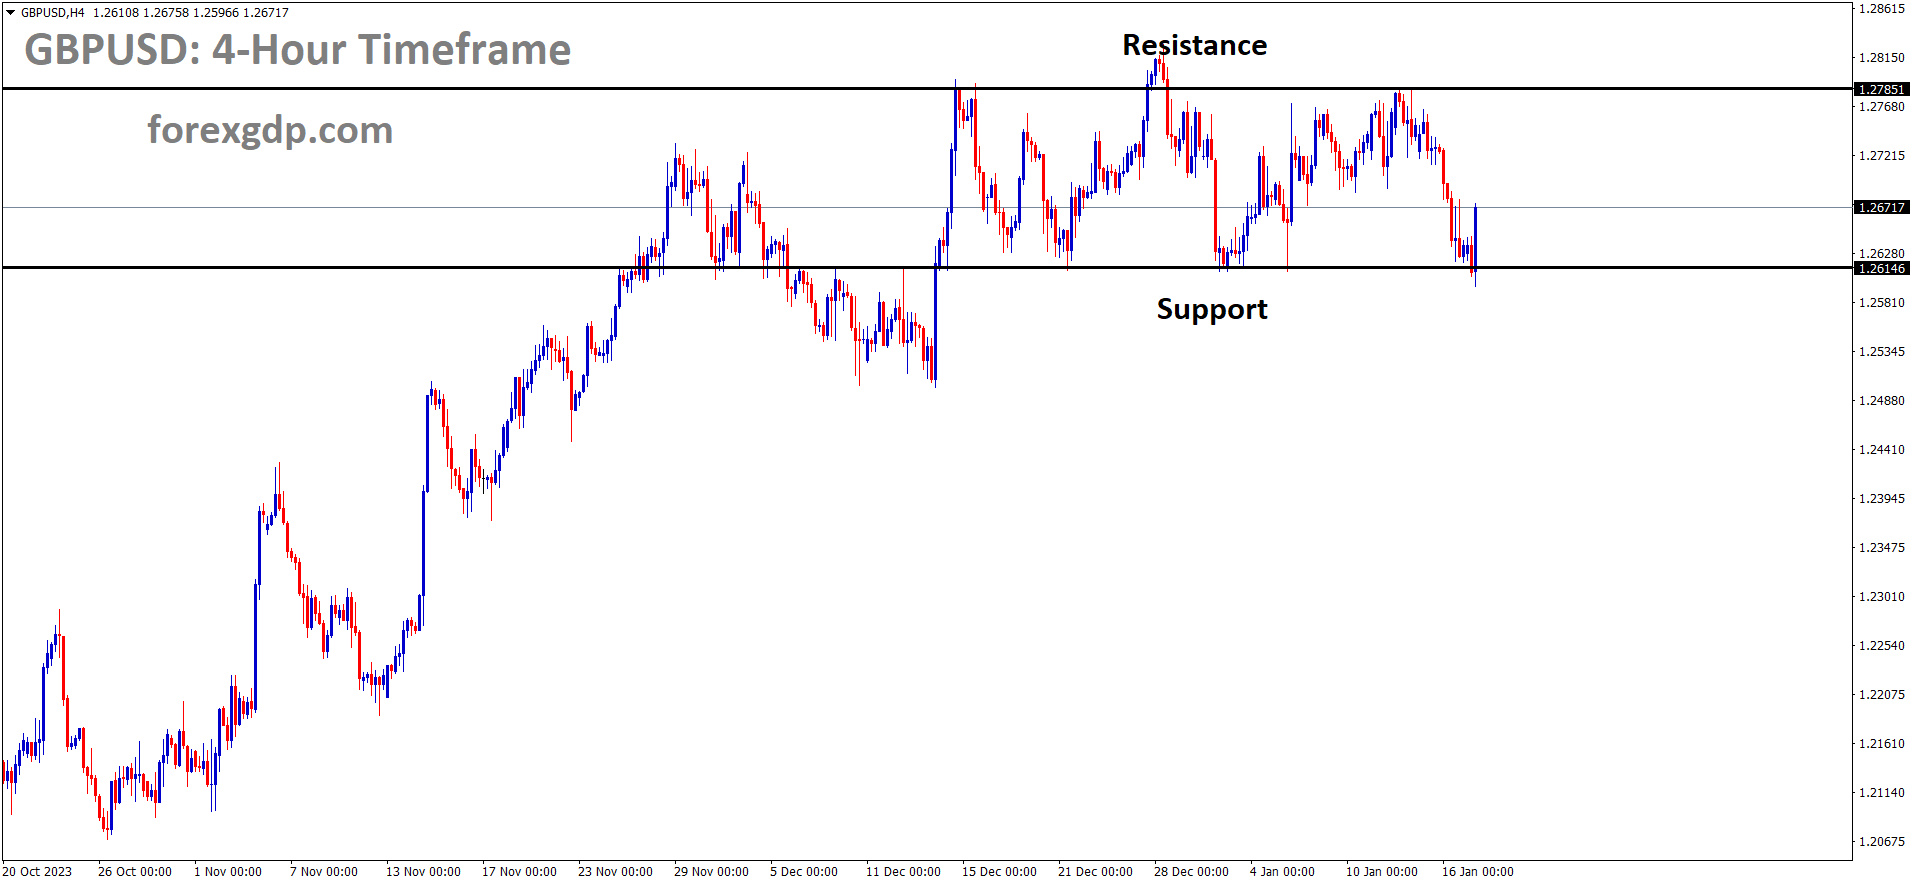 GBPUSD is moving in the Box pattern and the market has rebounded from the support area of the pattern 1